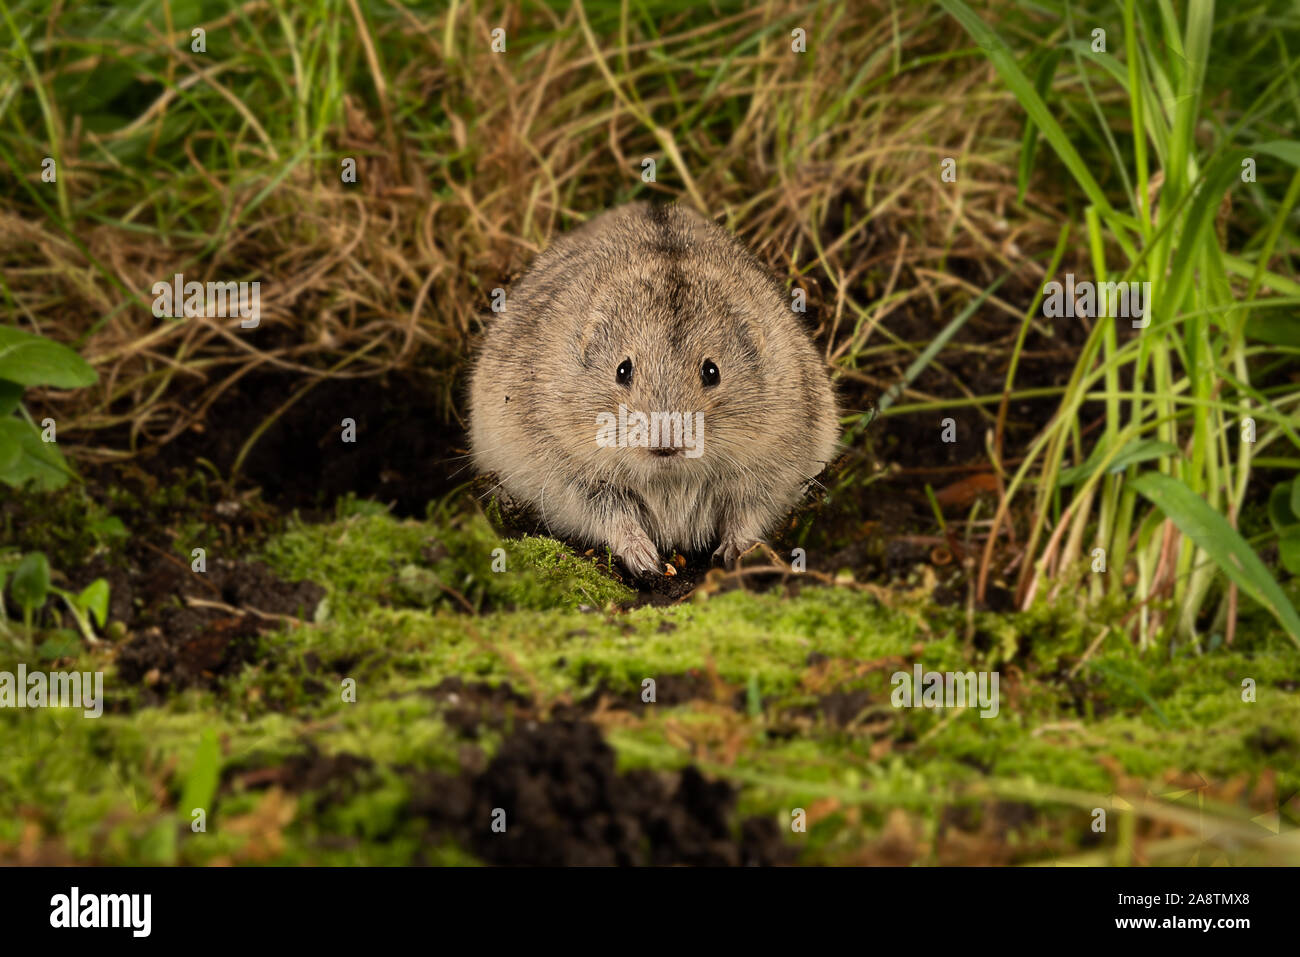 A frontal view of a Lemming, Cricetidae, as it sits on the ground and stares forward at the camera Stock Photo